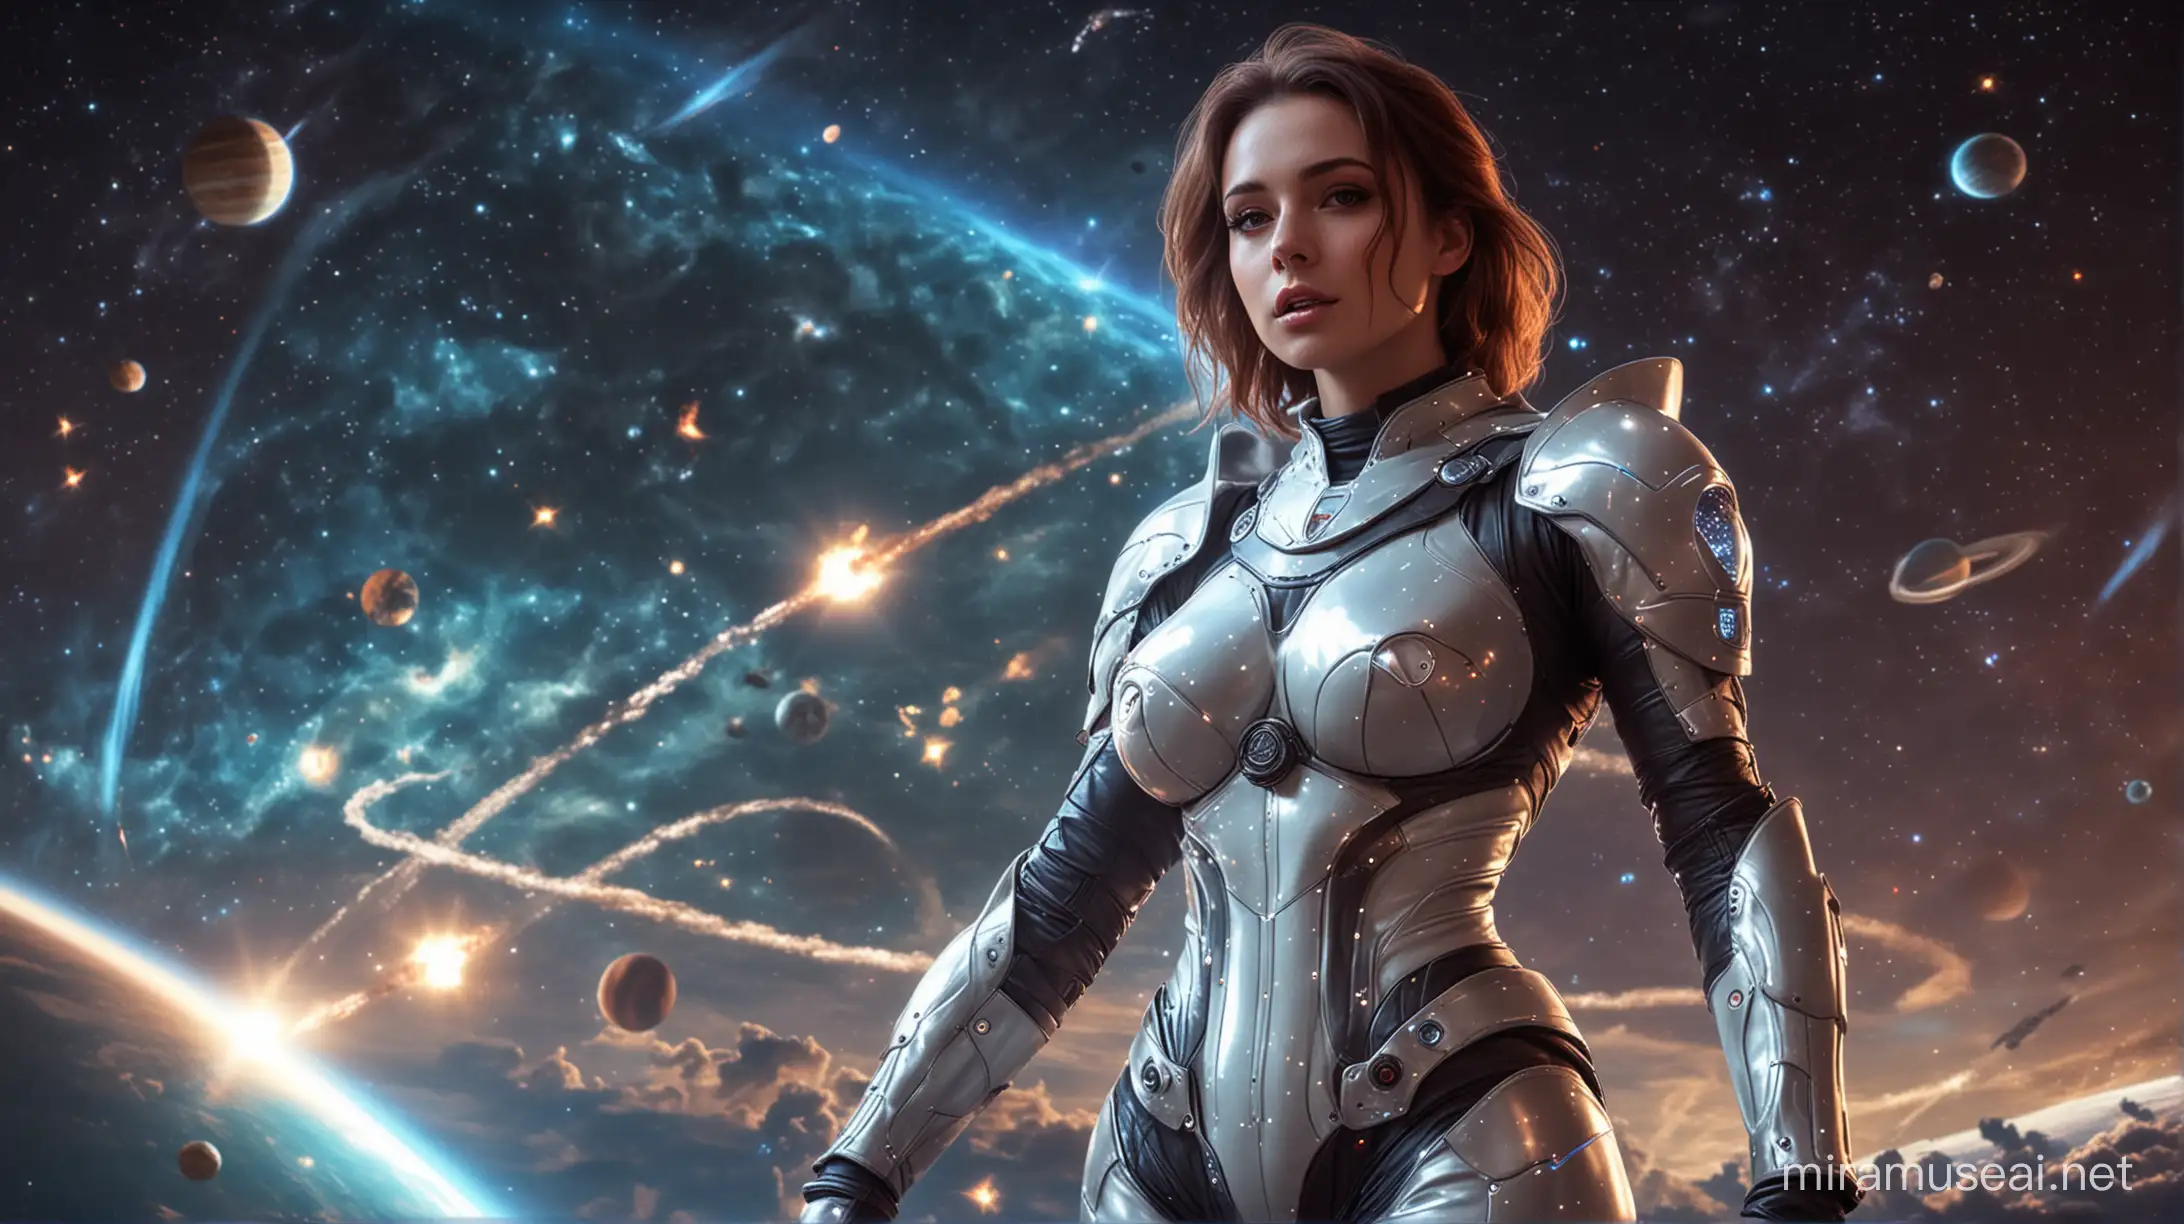 sexy knight girl, sexy make up, big boobs, large tits, tight spacesuit, glowing spacesuit, cian spacesuit, space planets, rockets in the sky